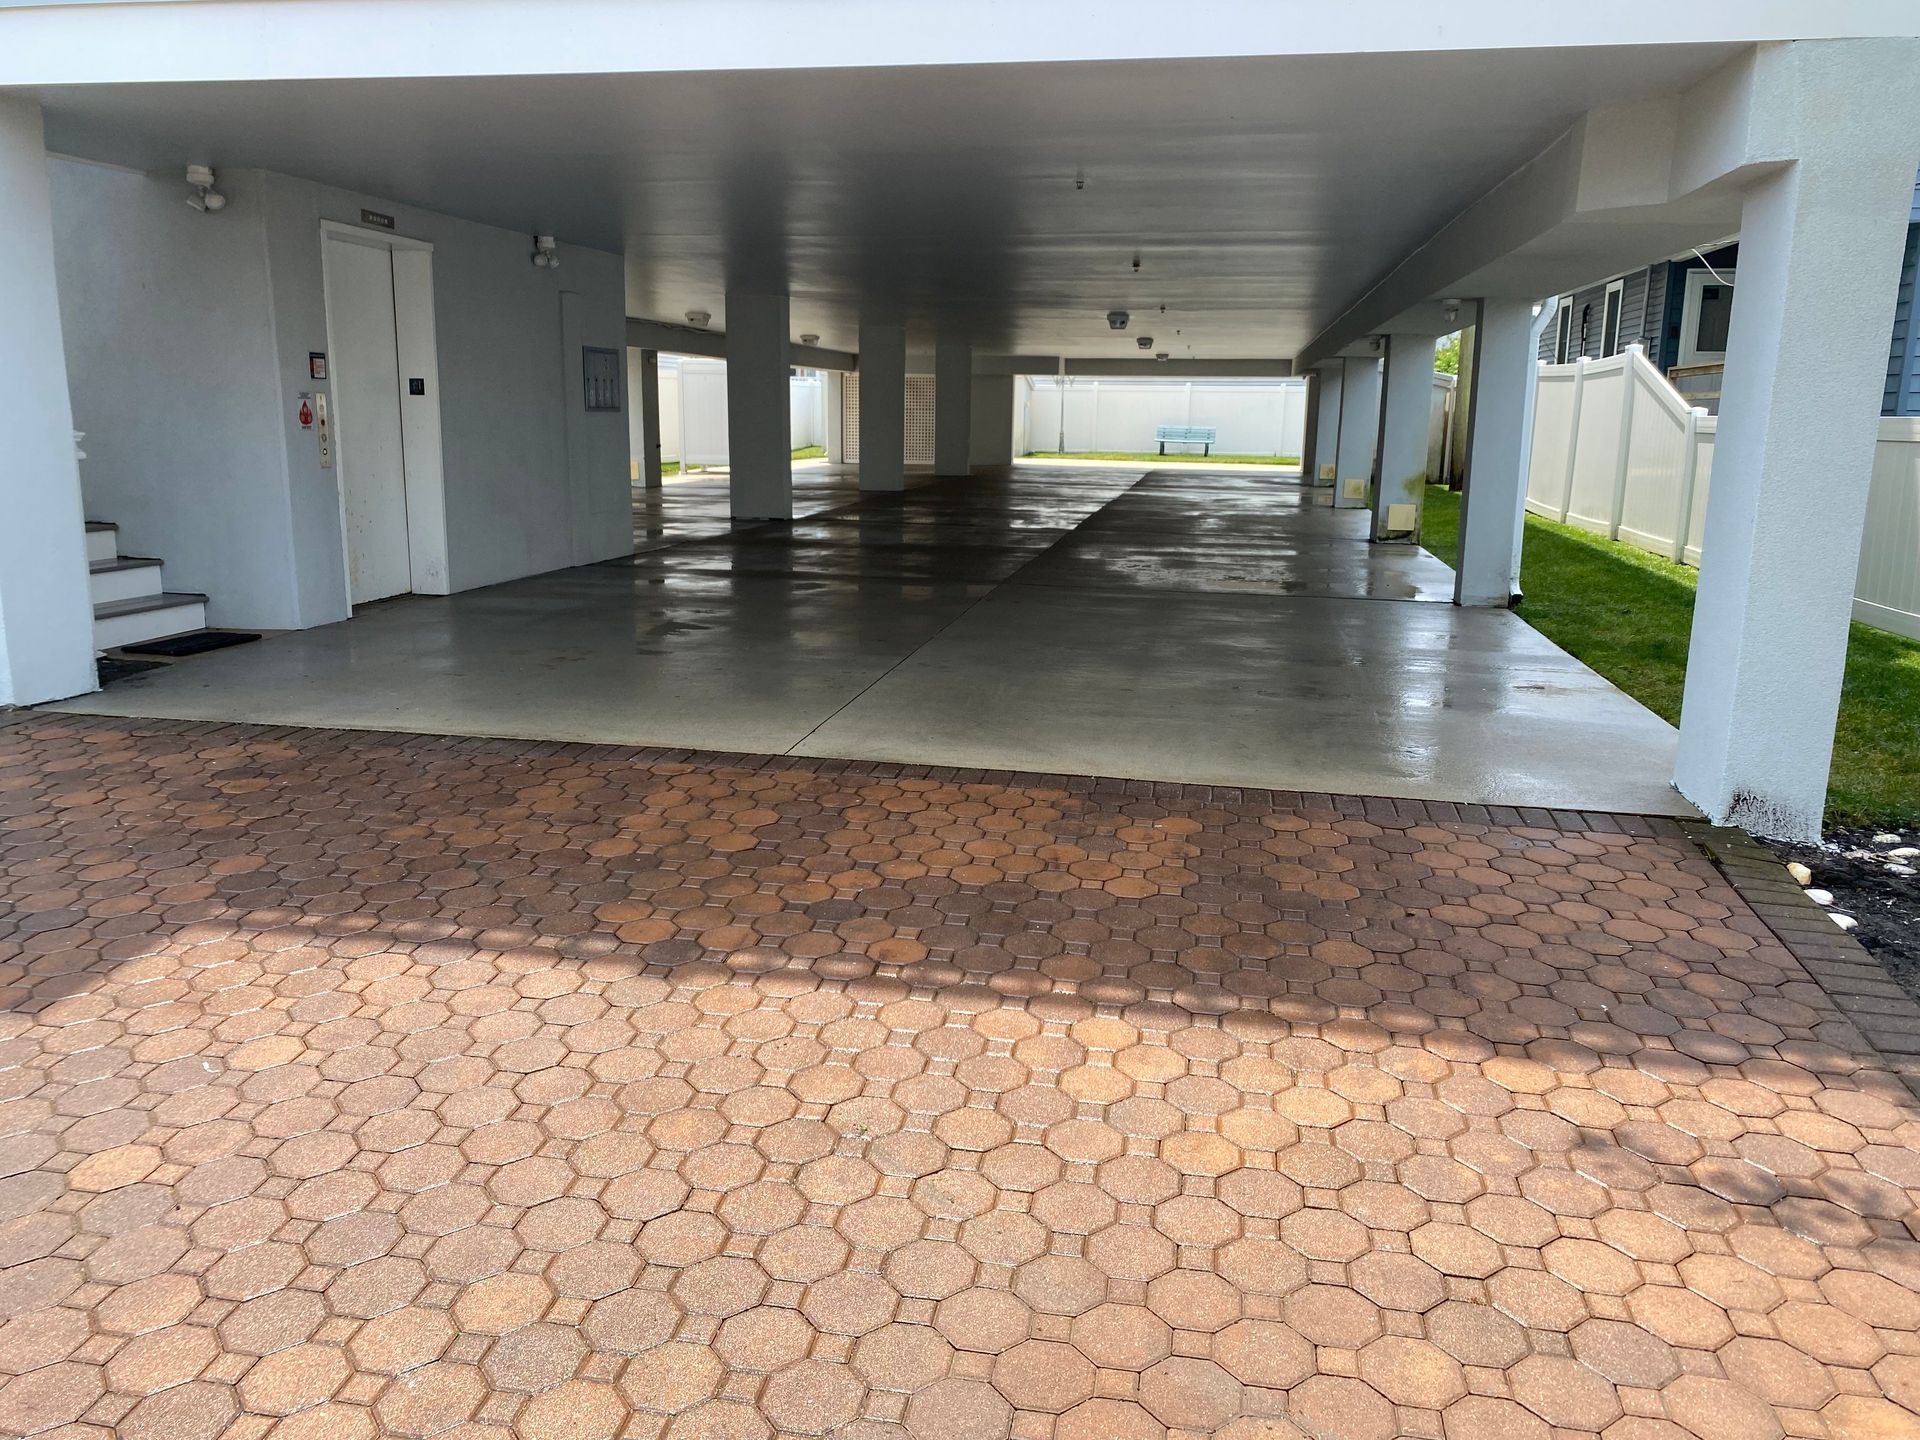 Pavers that were power washed